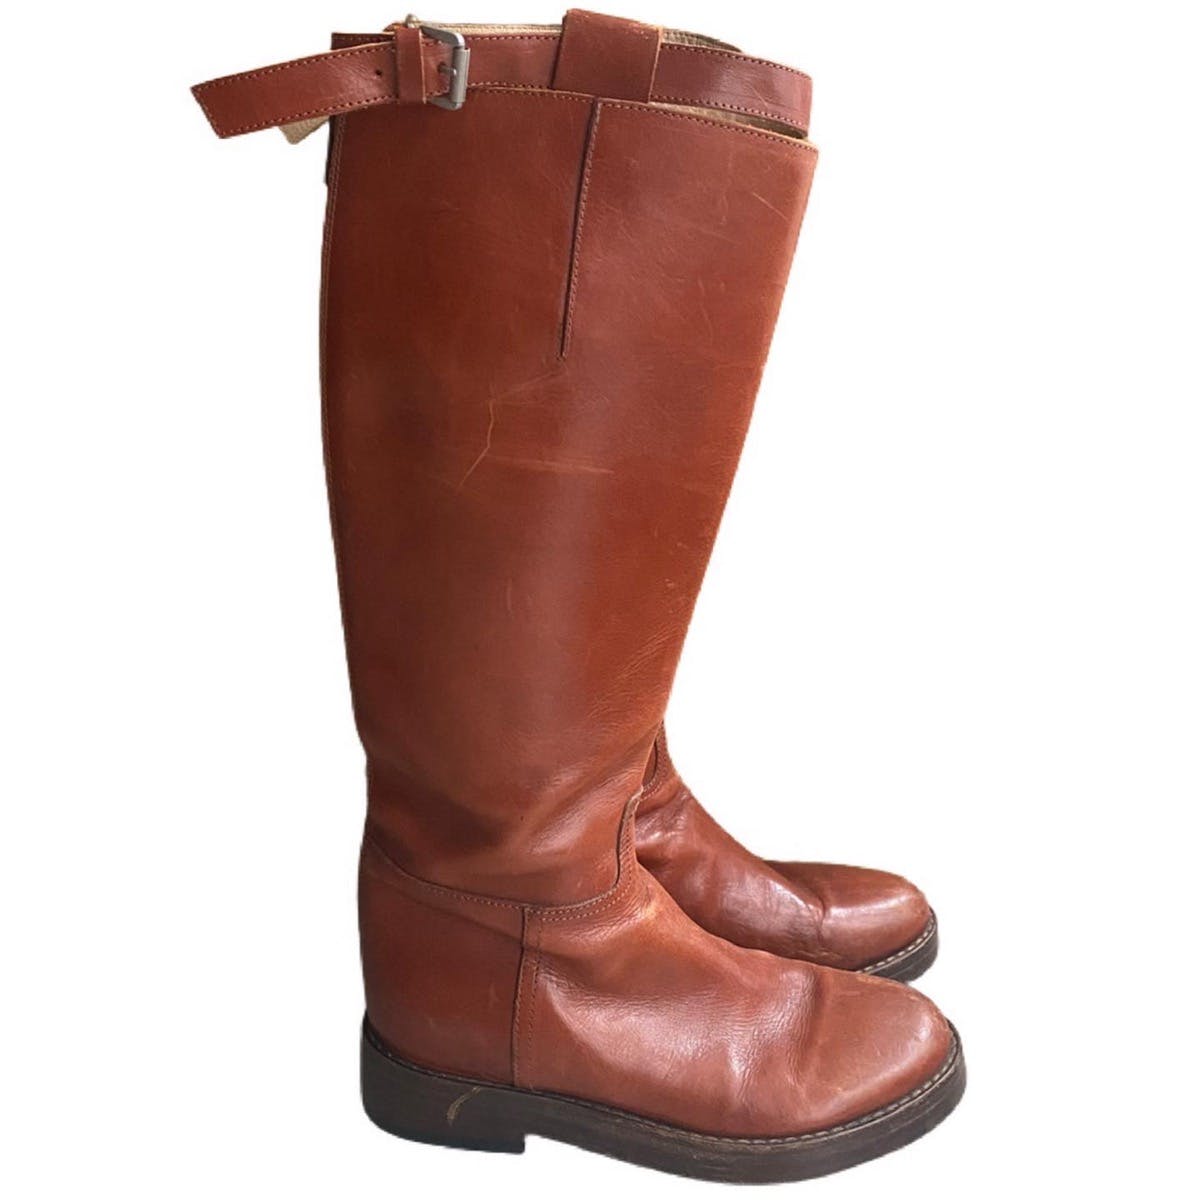 FW04 Runway Riding Boots - 2